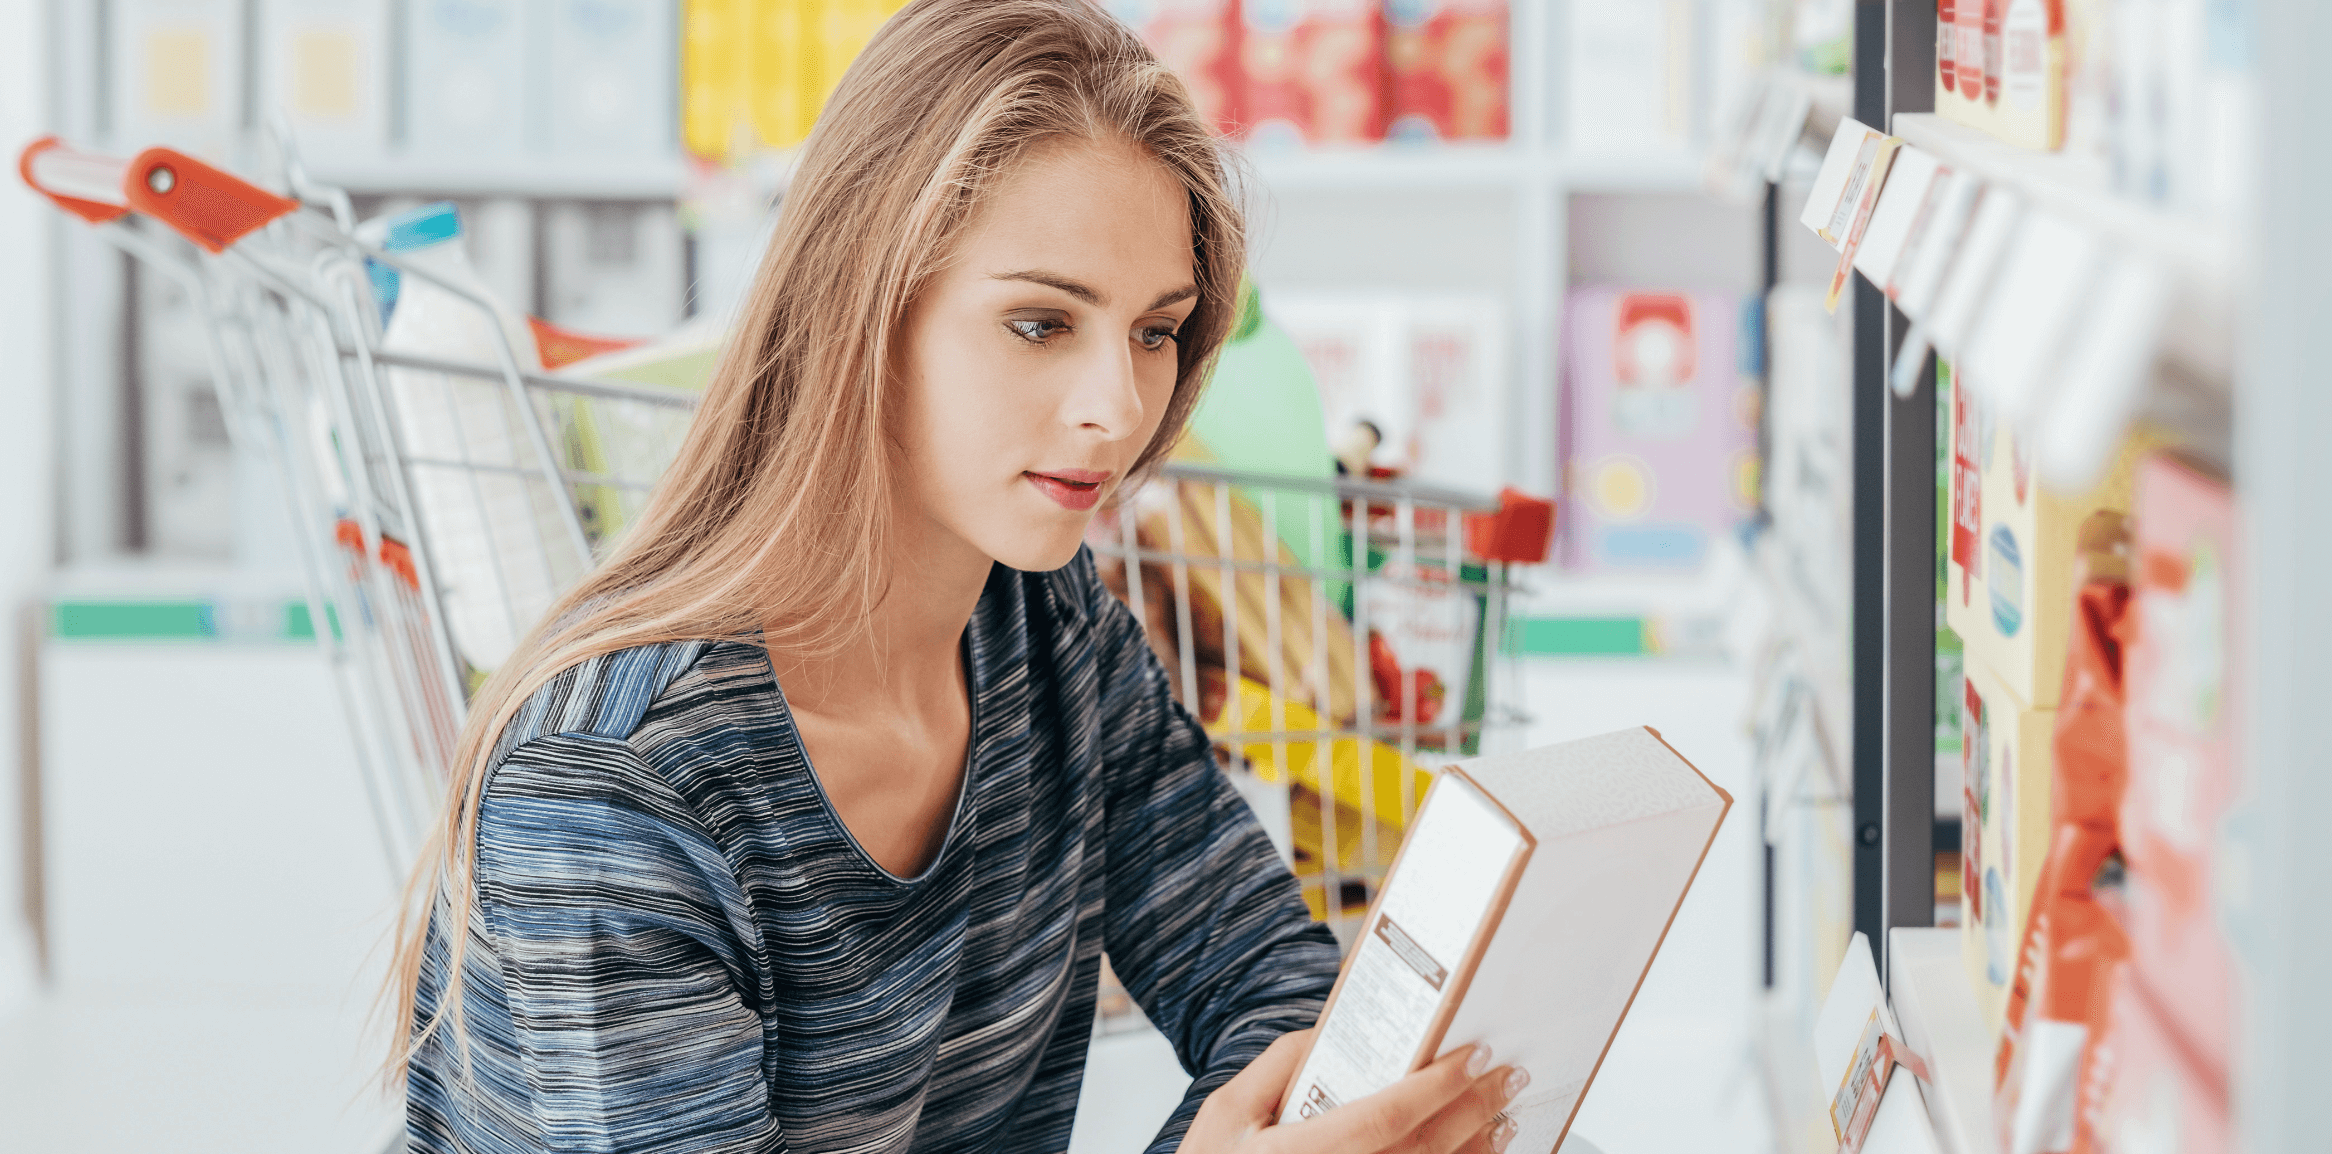 A blonde, fare-skinned woman in a grocery store looks closely at a cereal box.